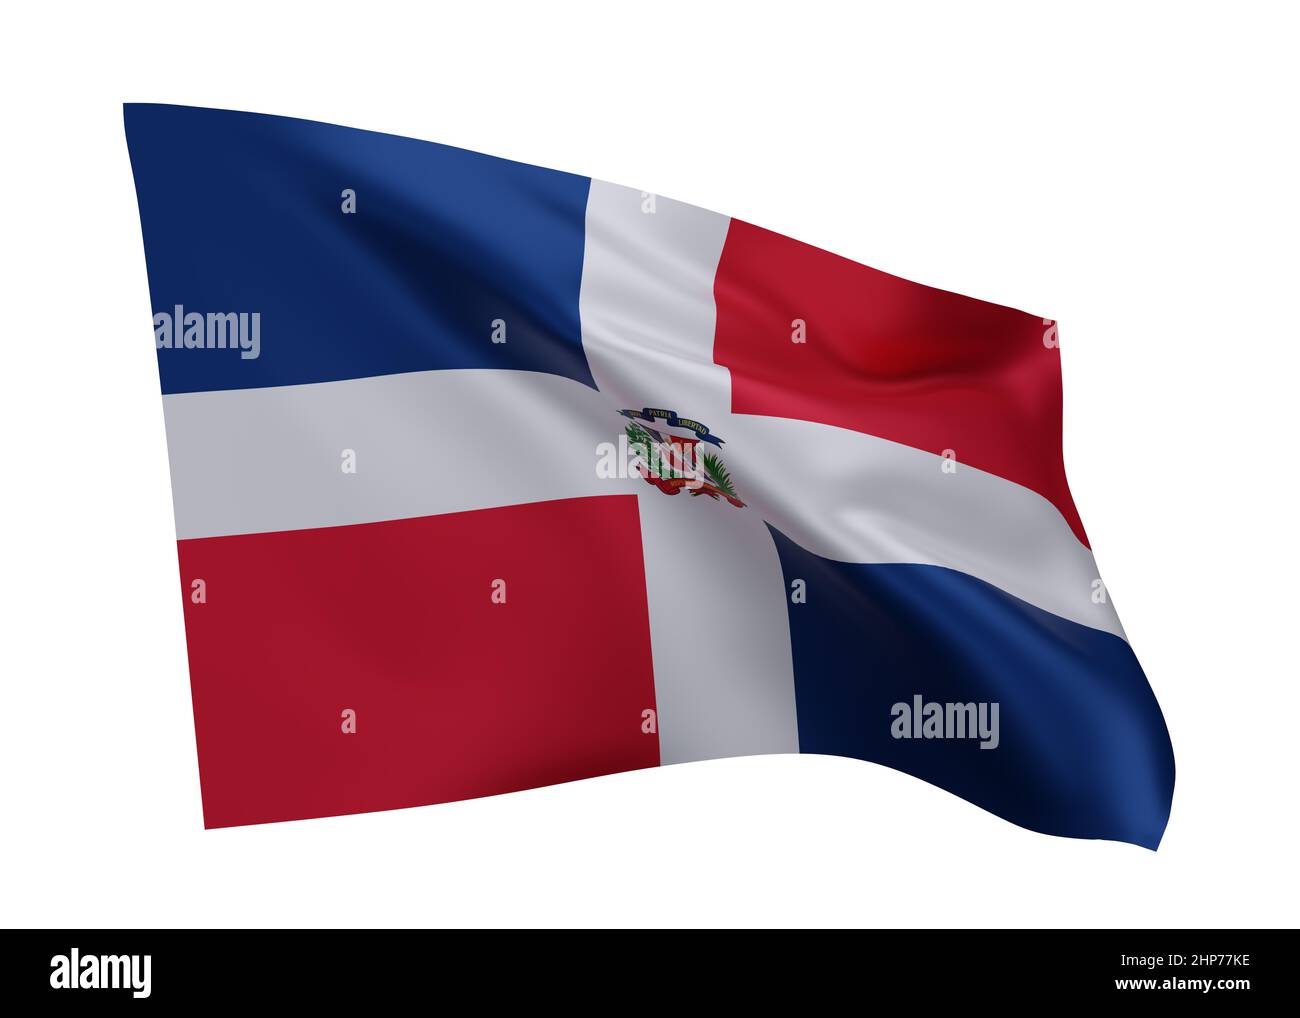 3d illustration flag of Dominican Republic . Dominican Republic high resolution flag isolated against white background. 3d rendering Stock Photo